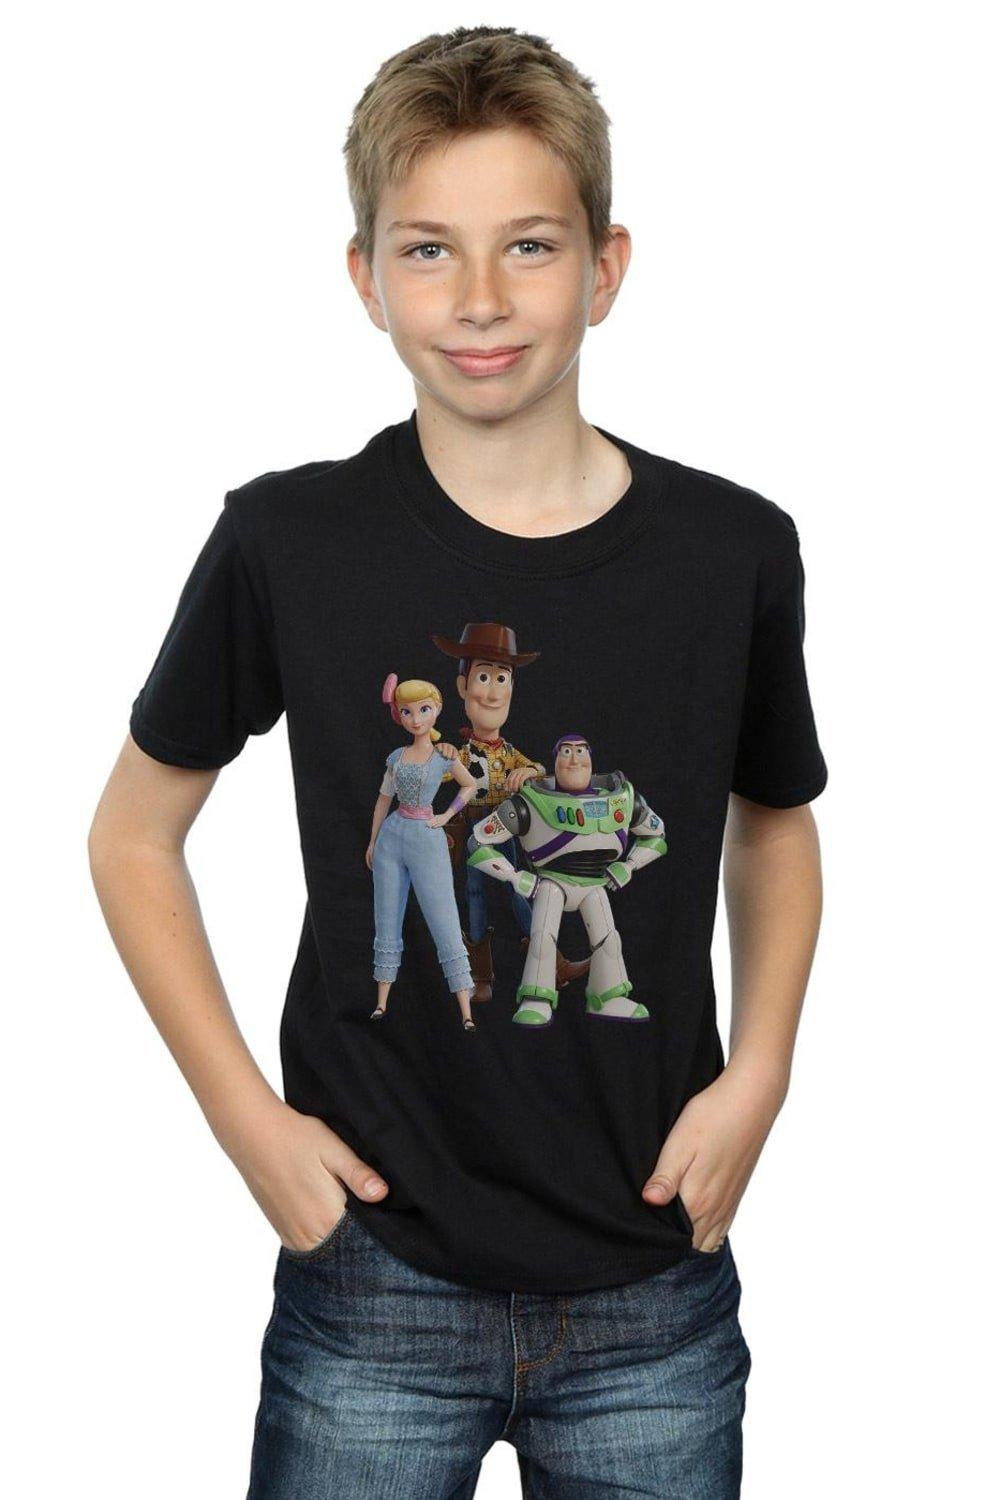 Toy Story 4 Woody Buzz and Bo Peep T-Shirt